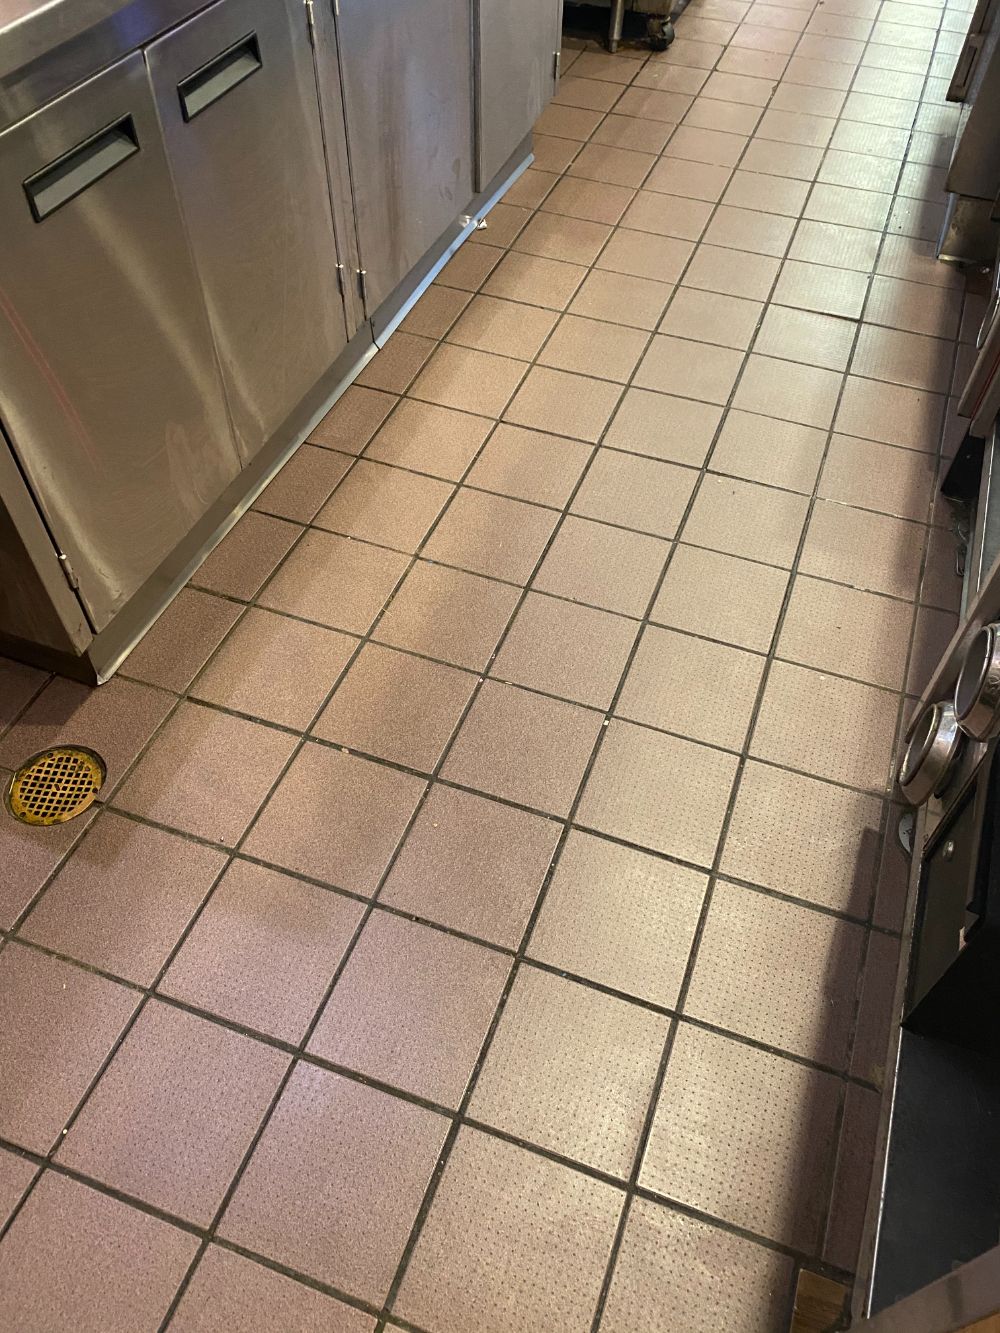 Commercial tile grout cleaning pittsburgh pa floor care